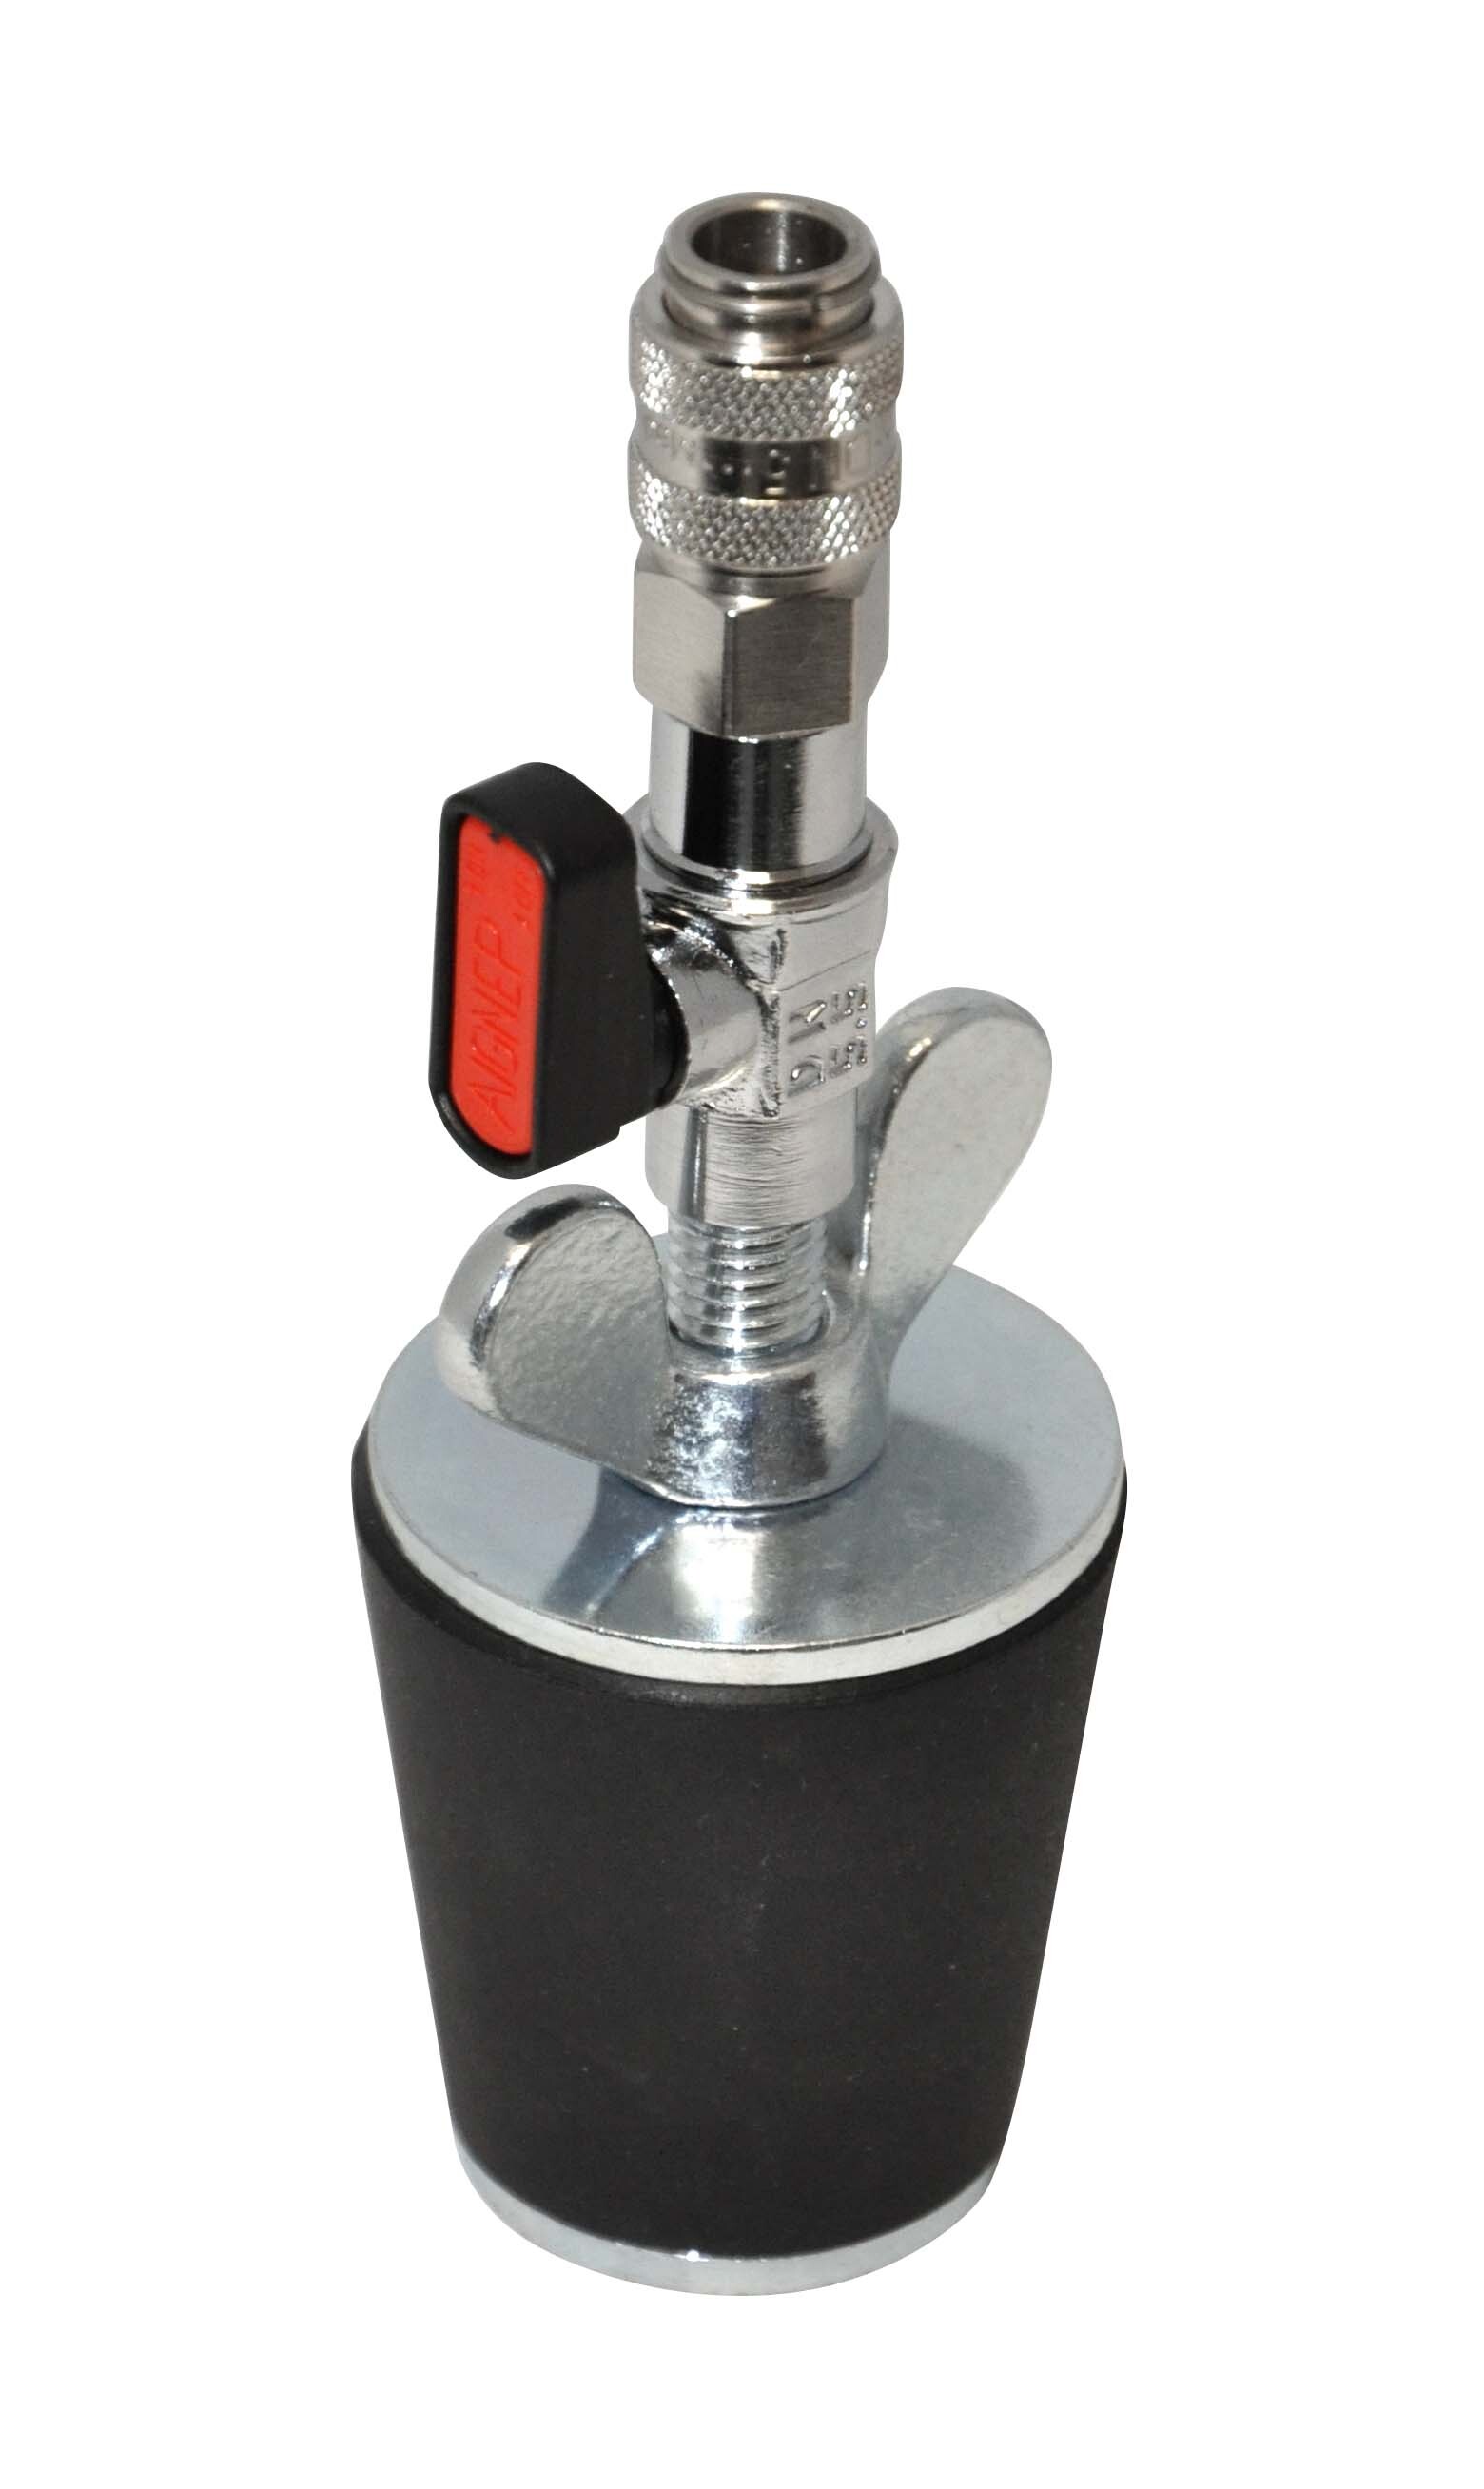 Test plug 1 1/2" conic with ball valve and coupling S 21 cone diameter 35 - 45 mm